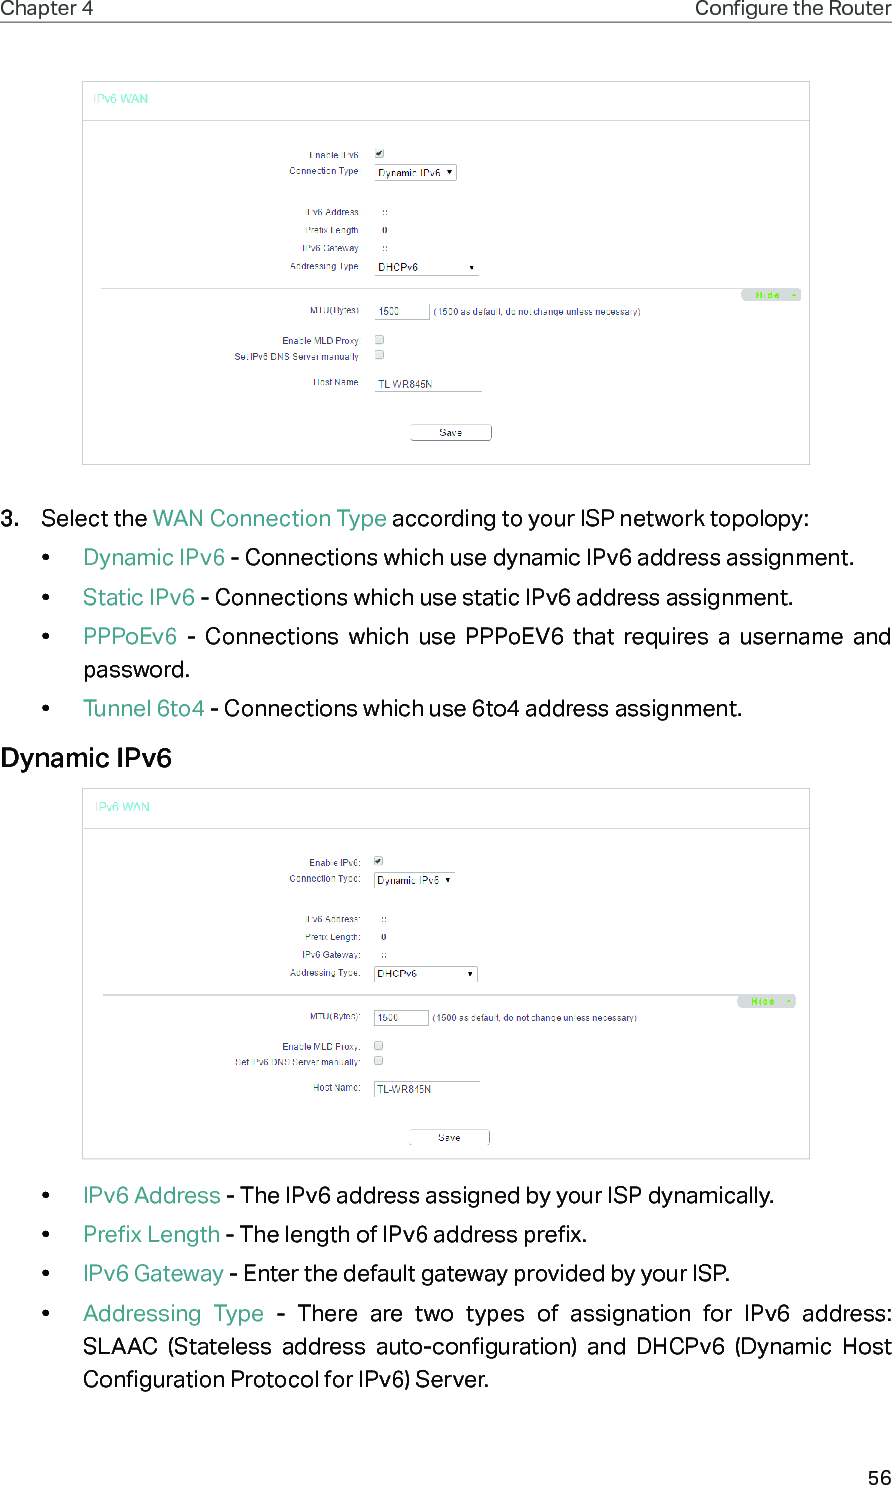 56Chapter 4 Congure the Router 3.  Select the WAN Connection Type according to your ISP network topolopy:•  Dynamic IPv6 - Connections which use dynamic IPv6 address assignment. •  Static IPv6 - Connections which use static IPv6 address assignment. •  PPPoEv6  - Connections which use PPPoEV6 that requires a username and password. •  Tunnel 6to4 - Connections which use 6to4 address assignment.Dynamic IPv6•  IPv6 Address - The IPv6 address assigned by your ISP dynamically.•  Prefix Length - The length of IPv6 address prefix.•  IPv6 Gateway - Enter the default gateway provided by your ISP.•  Addressing Type - There are two types of assignation for IPv6 address: SLAAC (Stateless address auto-configuration) and DHCPv6 (Dynamic Host Configuration Protocol for IPv6) Server.